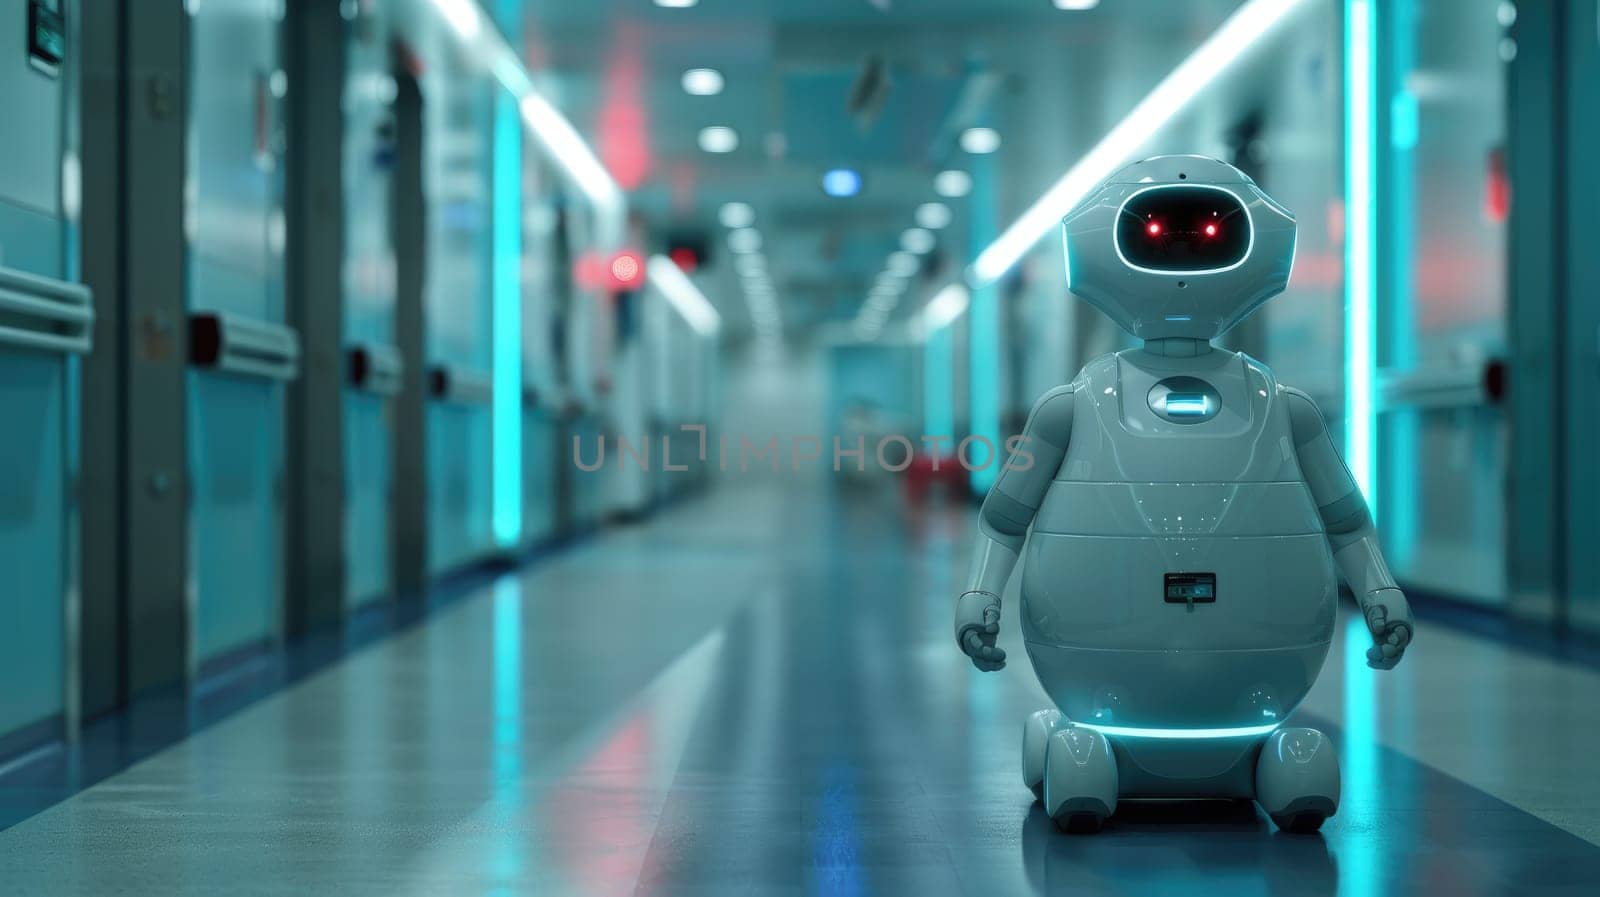 A healthcare robot in a modern hospital corrido, Automation for improved patient care.